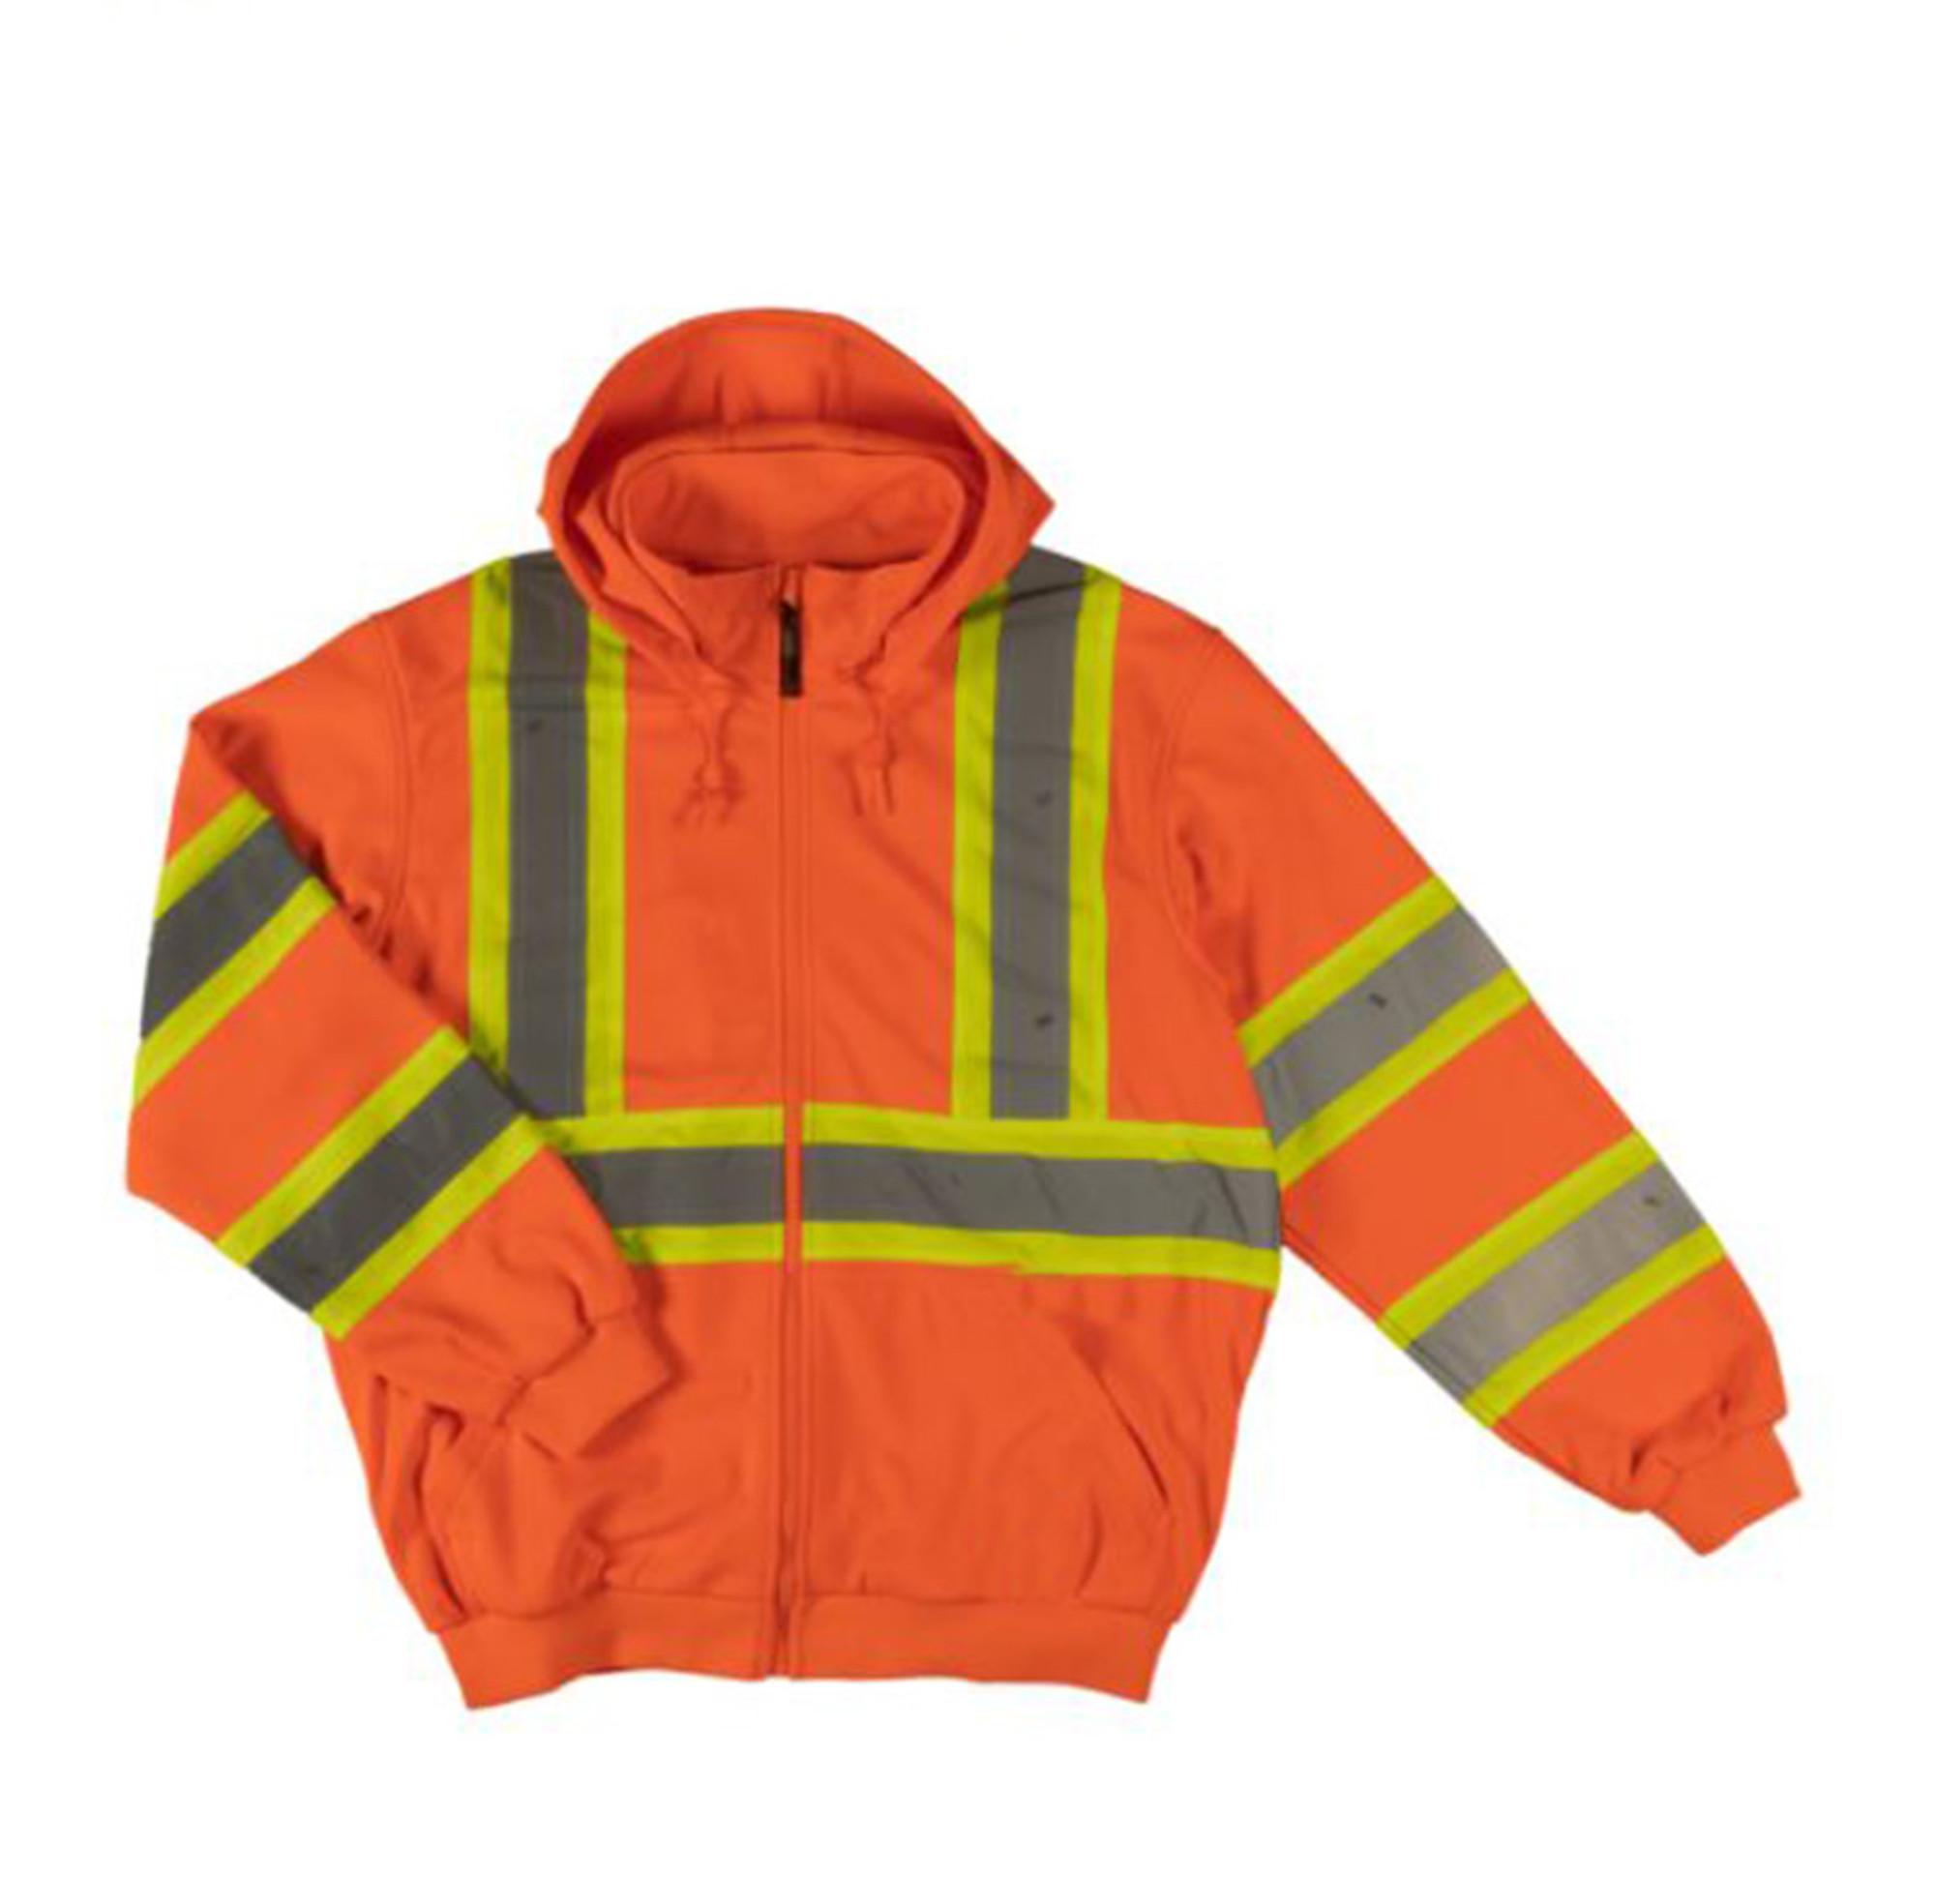 Unlined Safety Hoodie (Fluorescent Orange) - 2 Pack